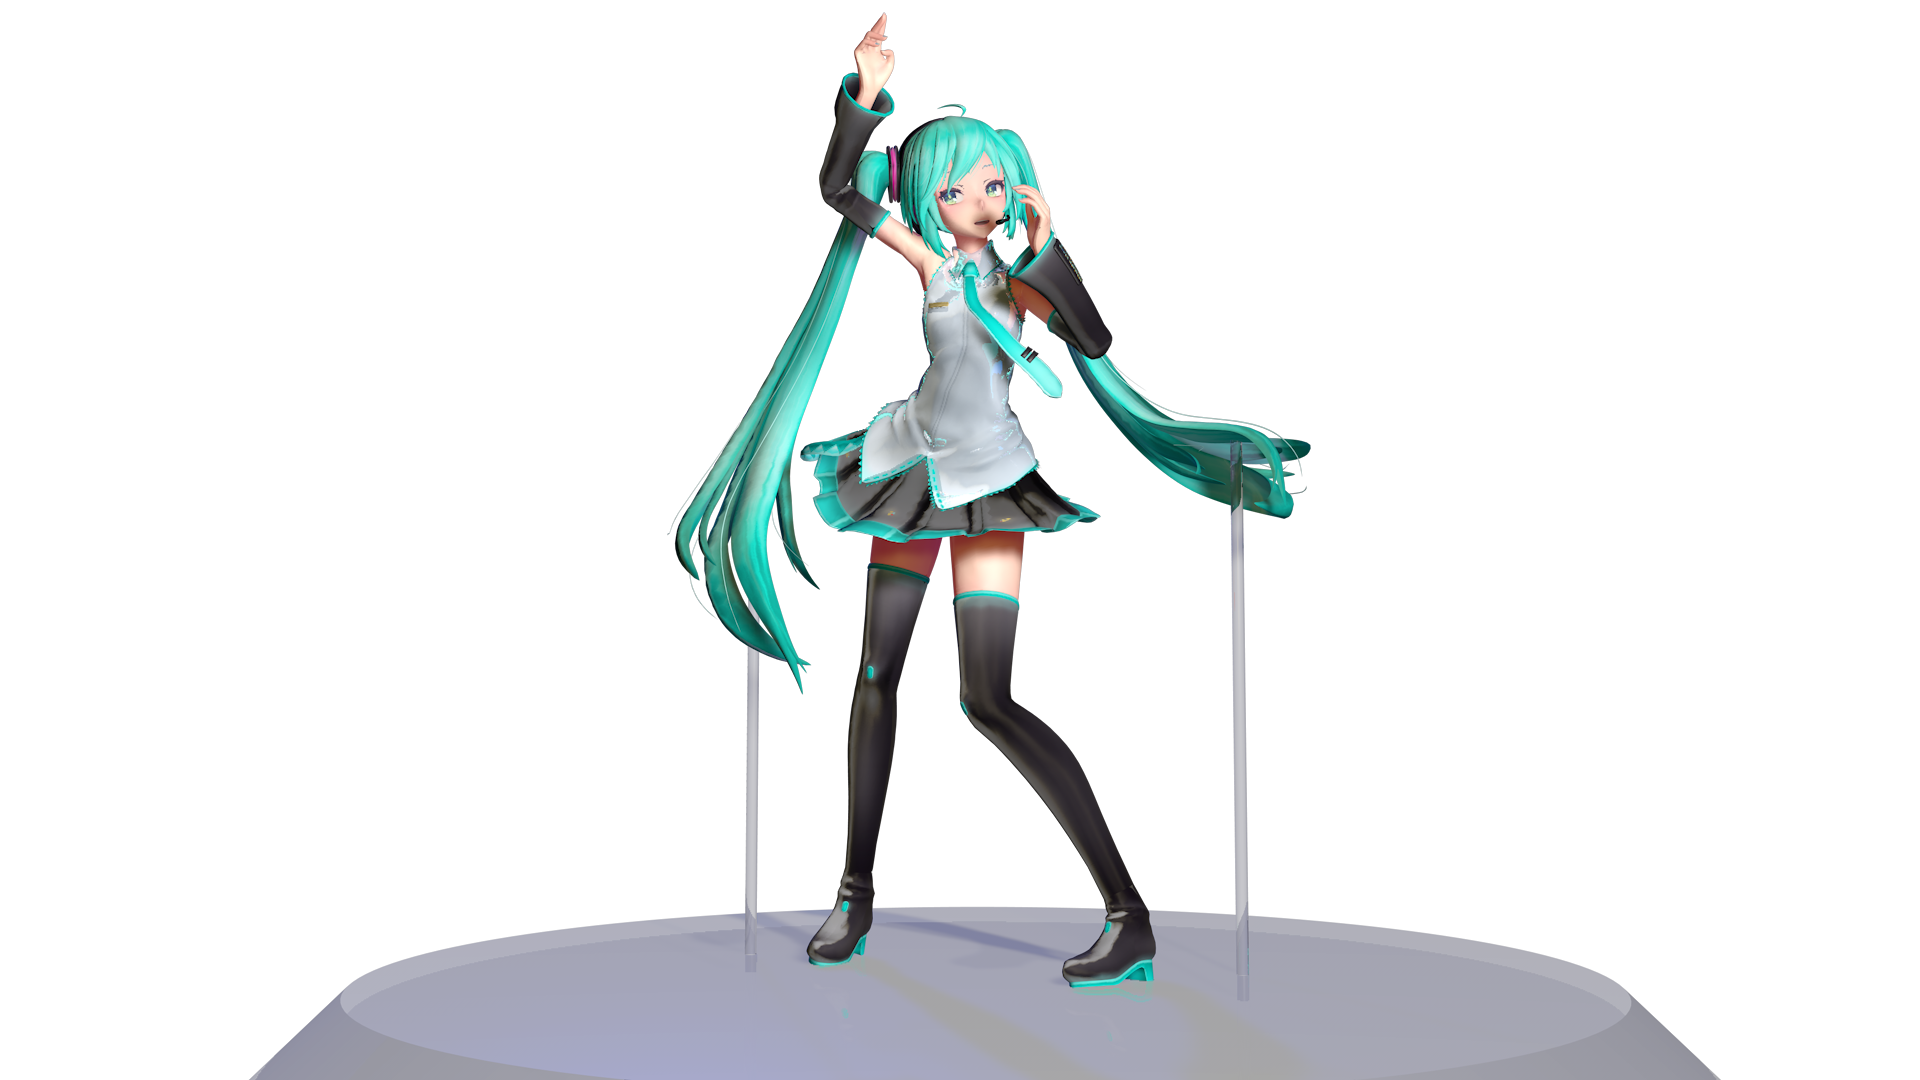 Yet another miku PNG